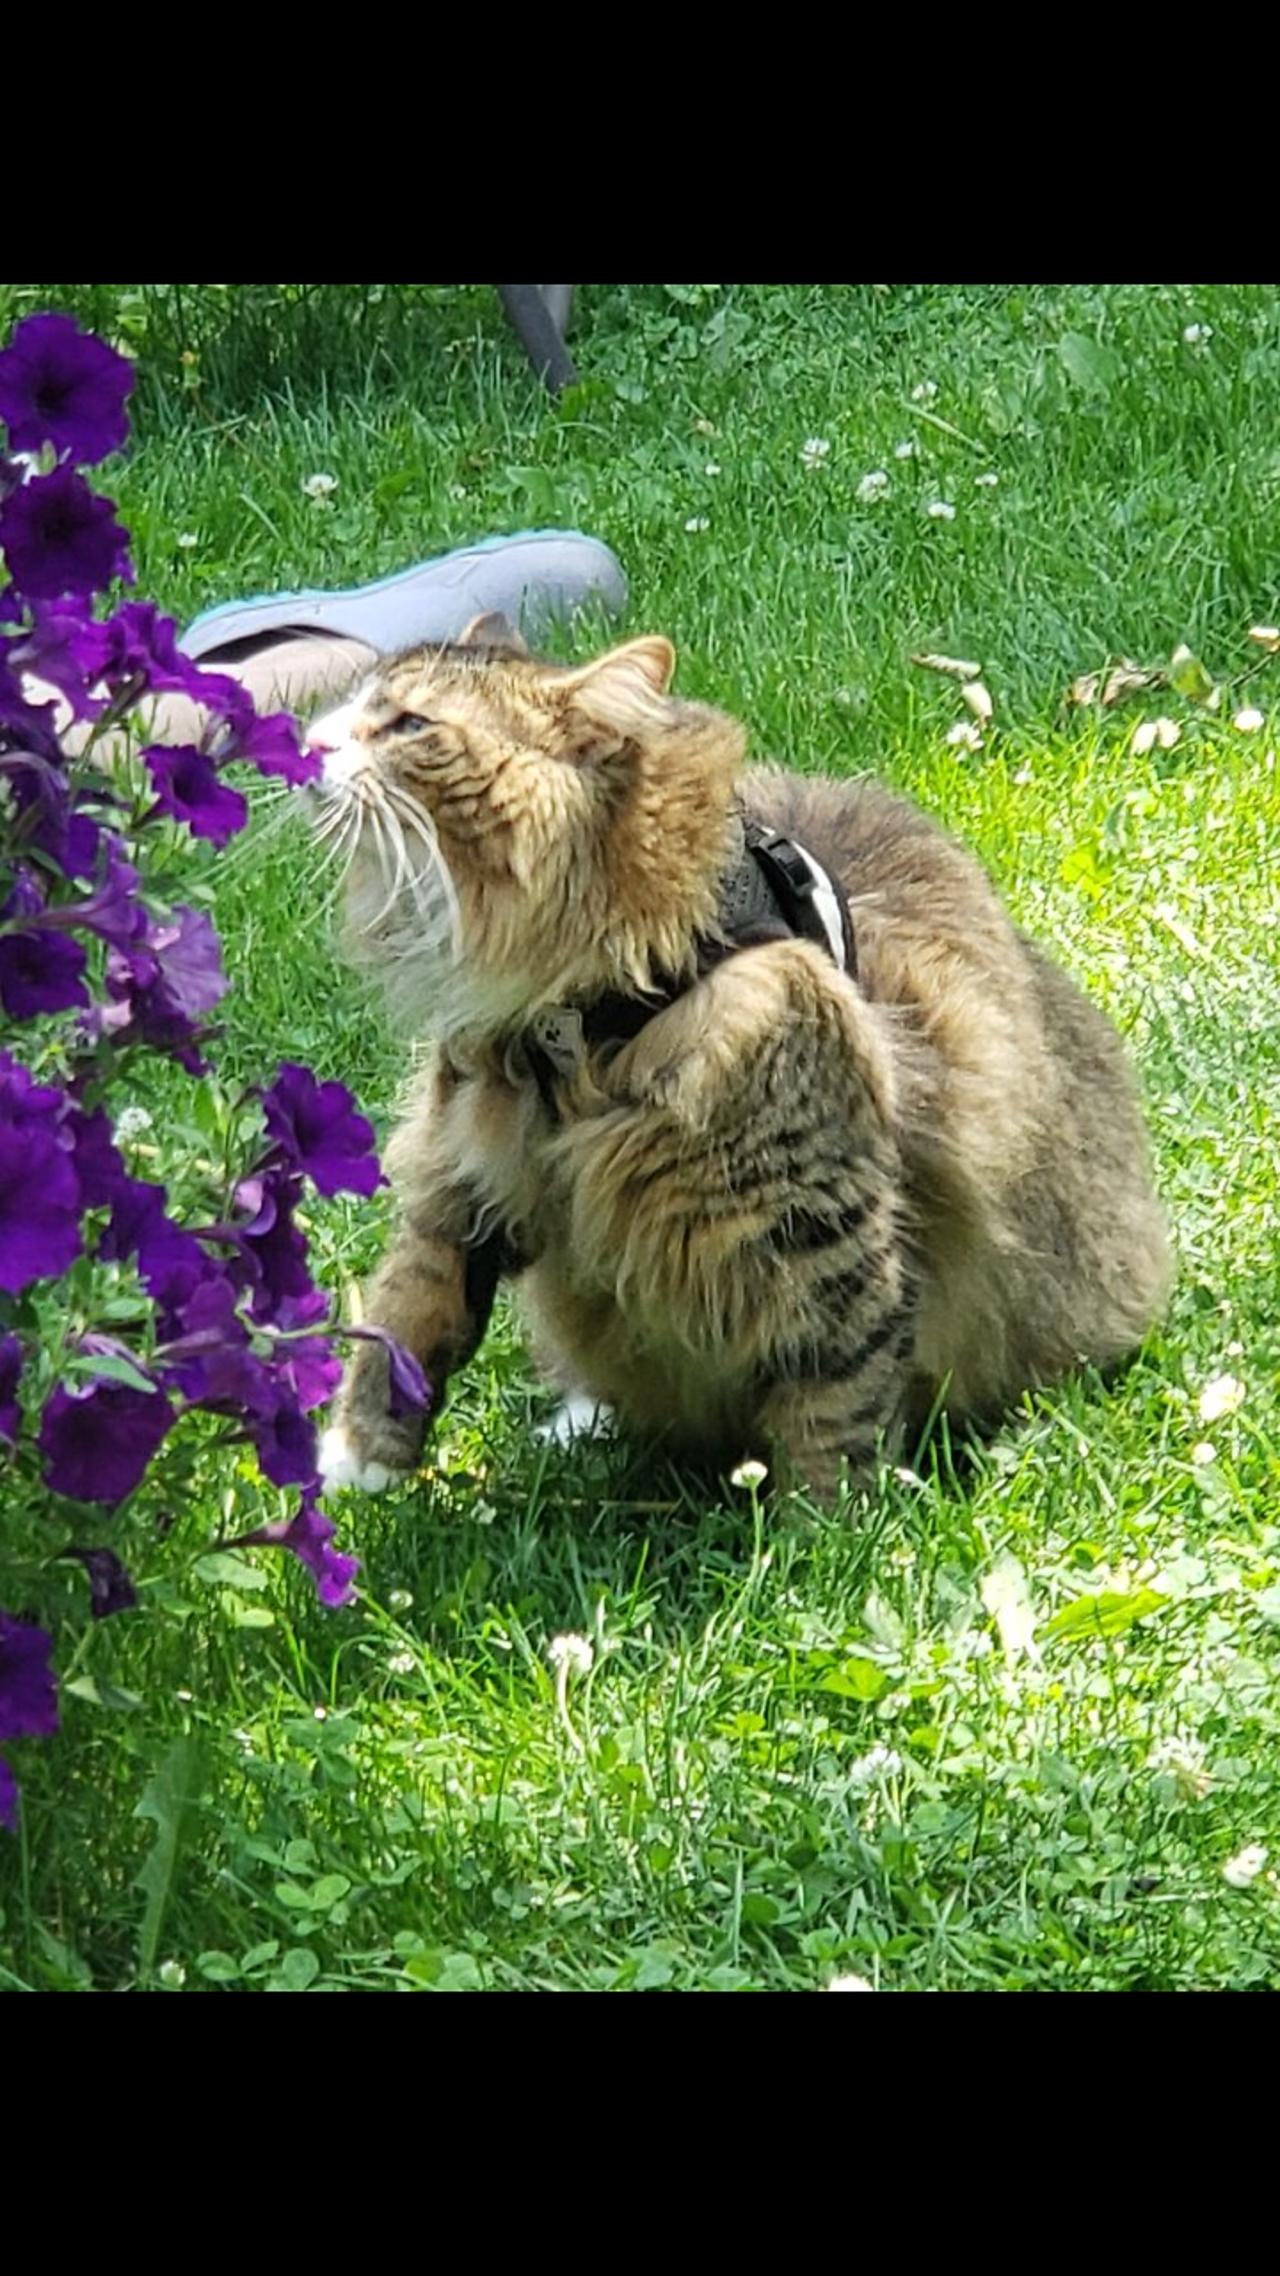 Petunia Goes Outside (Featuring Petunia The Norwegian Forest Cat)